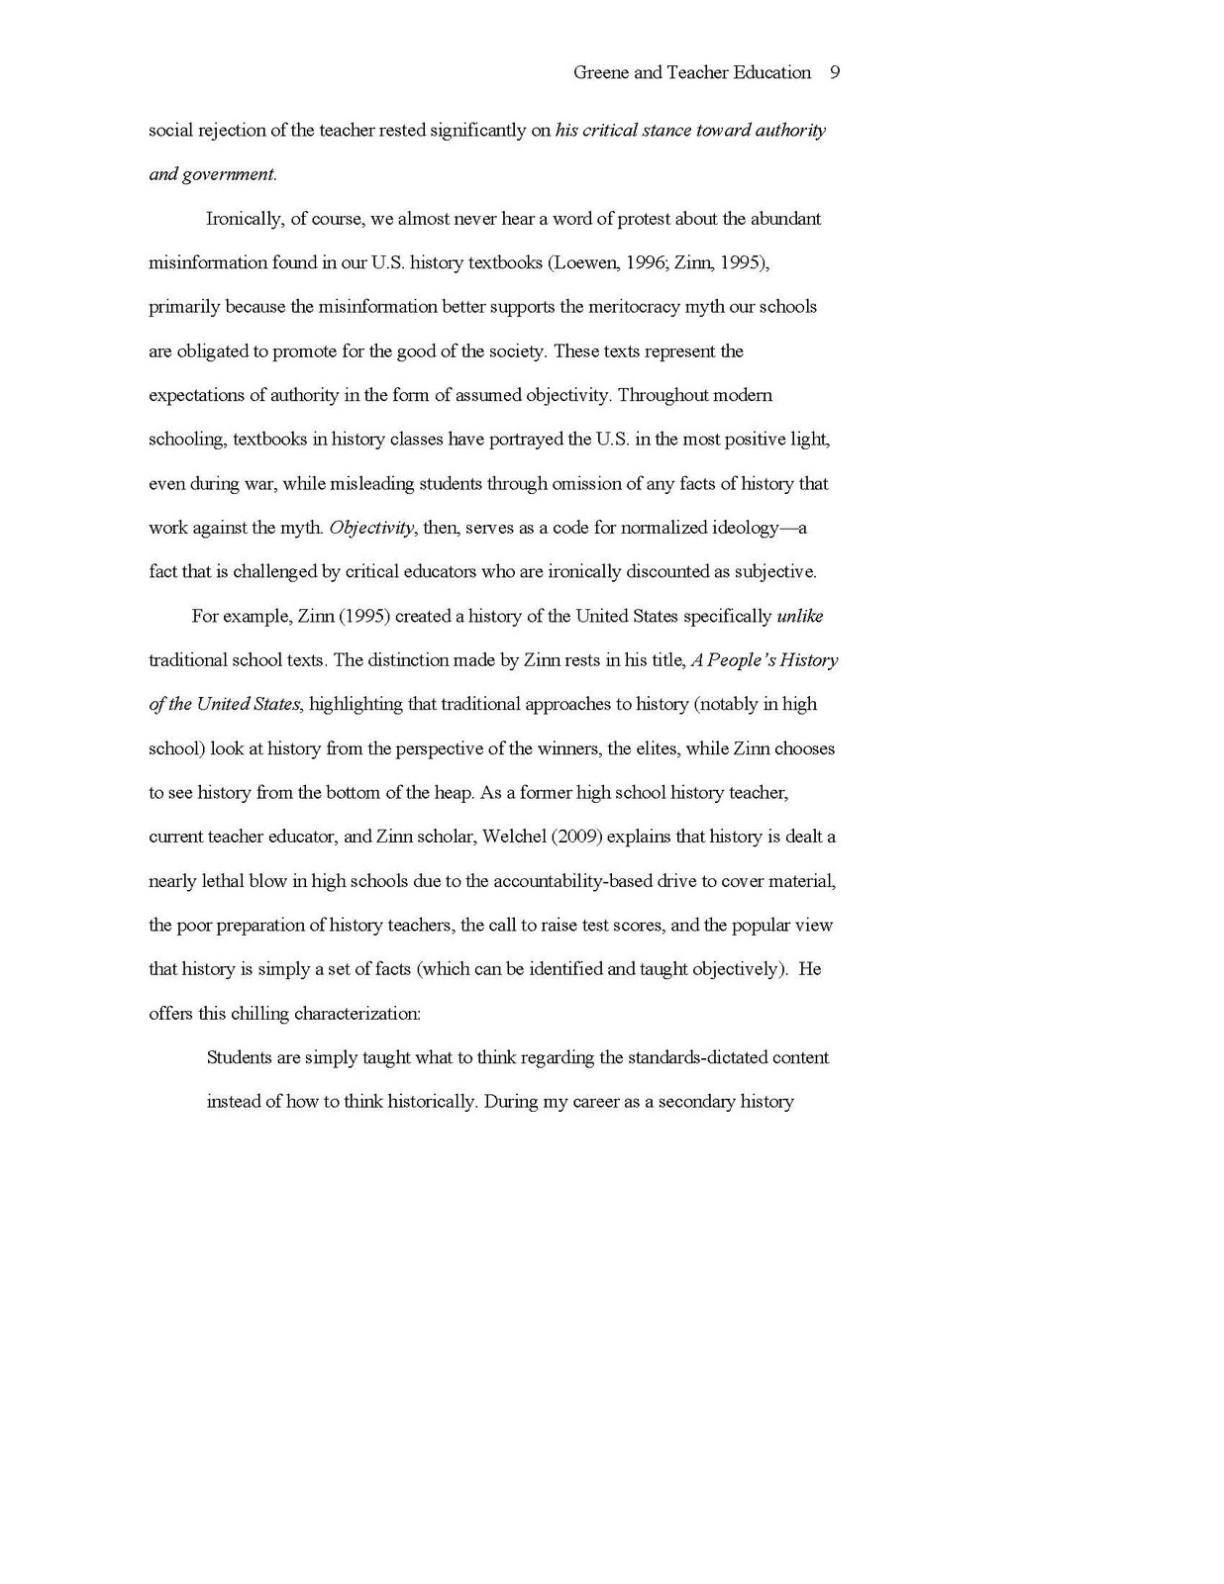 Download Apa Paper Template Word 2010 Free Software – Multimediautorrent Within Apa Research Paper Template Word 2010